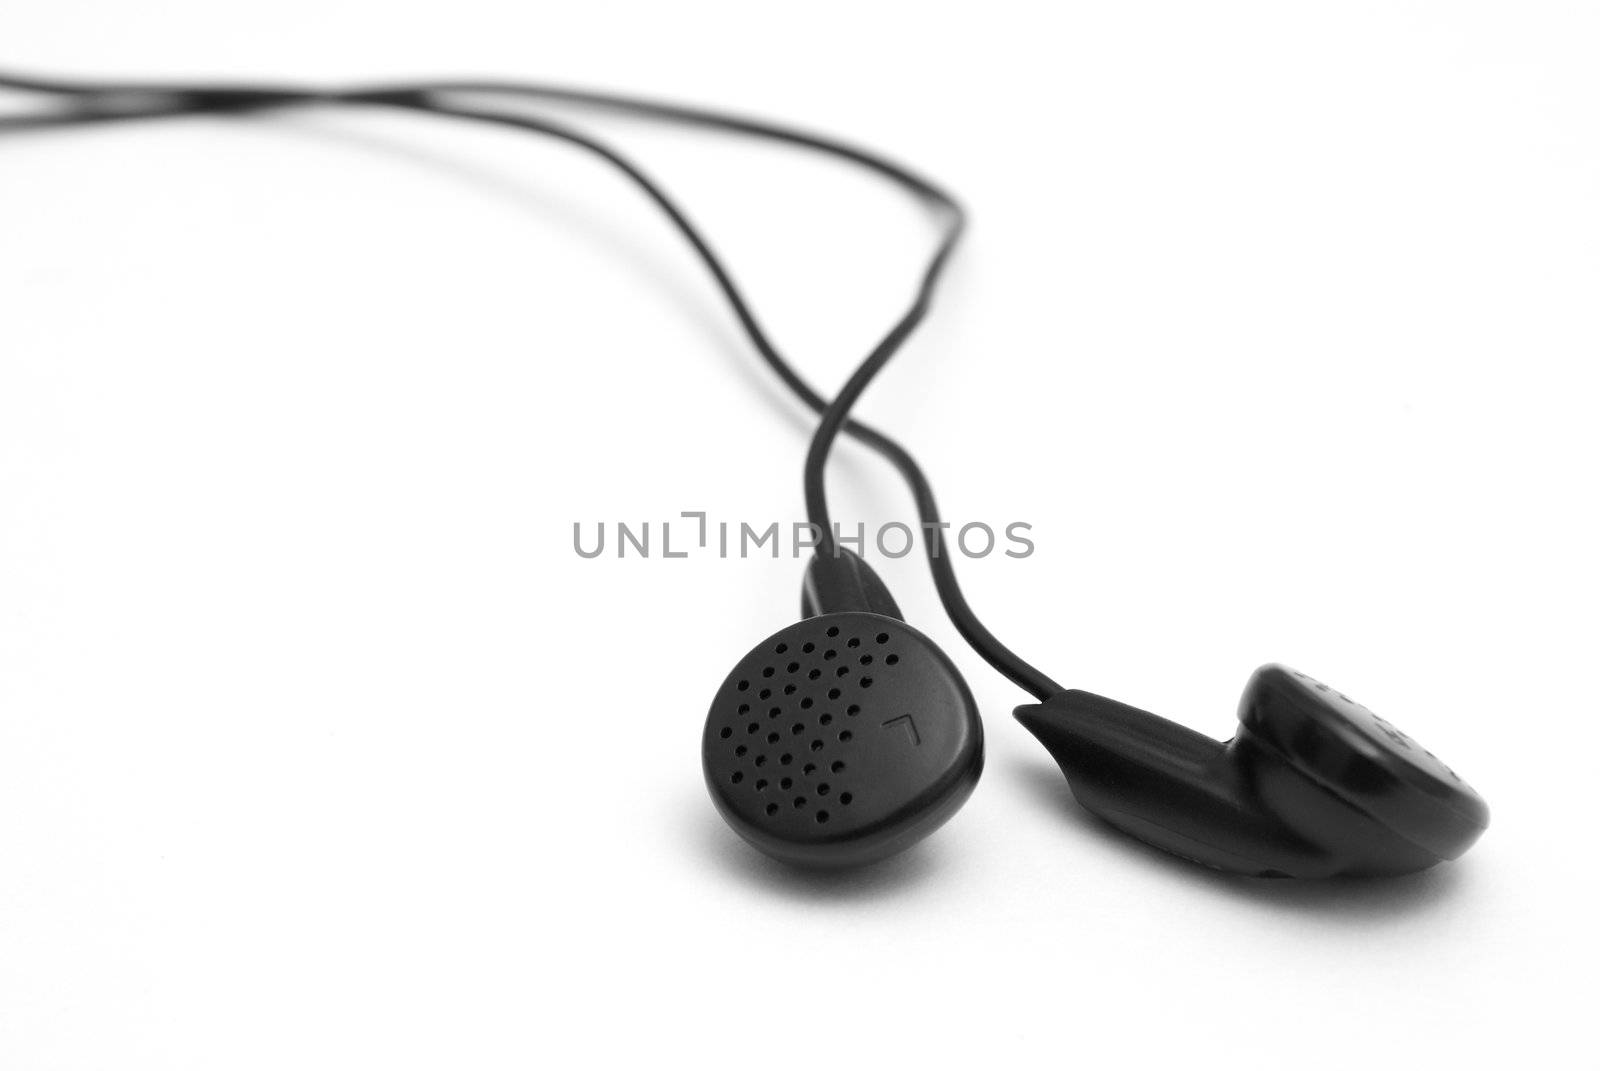 A set of headphones on white background.